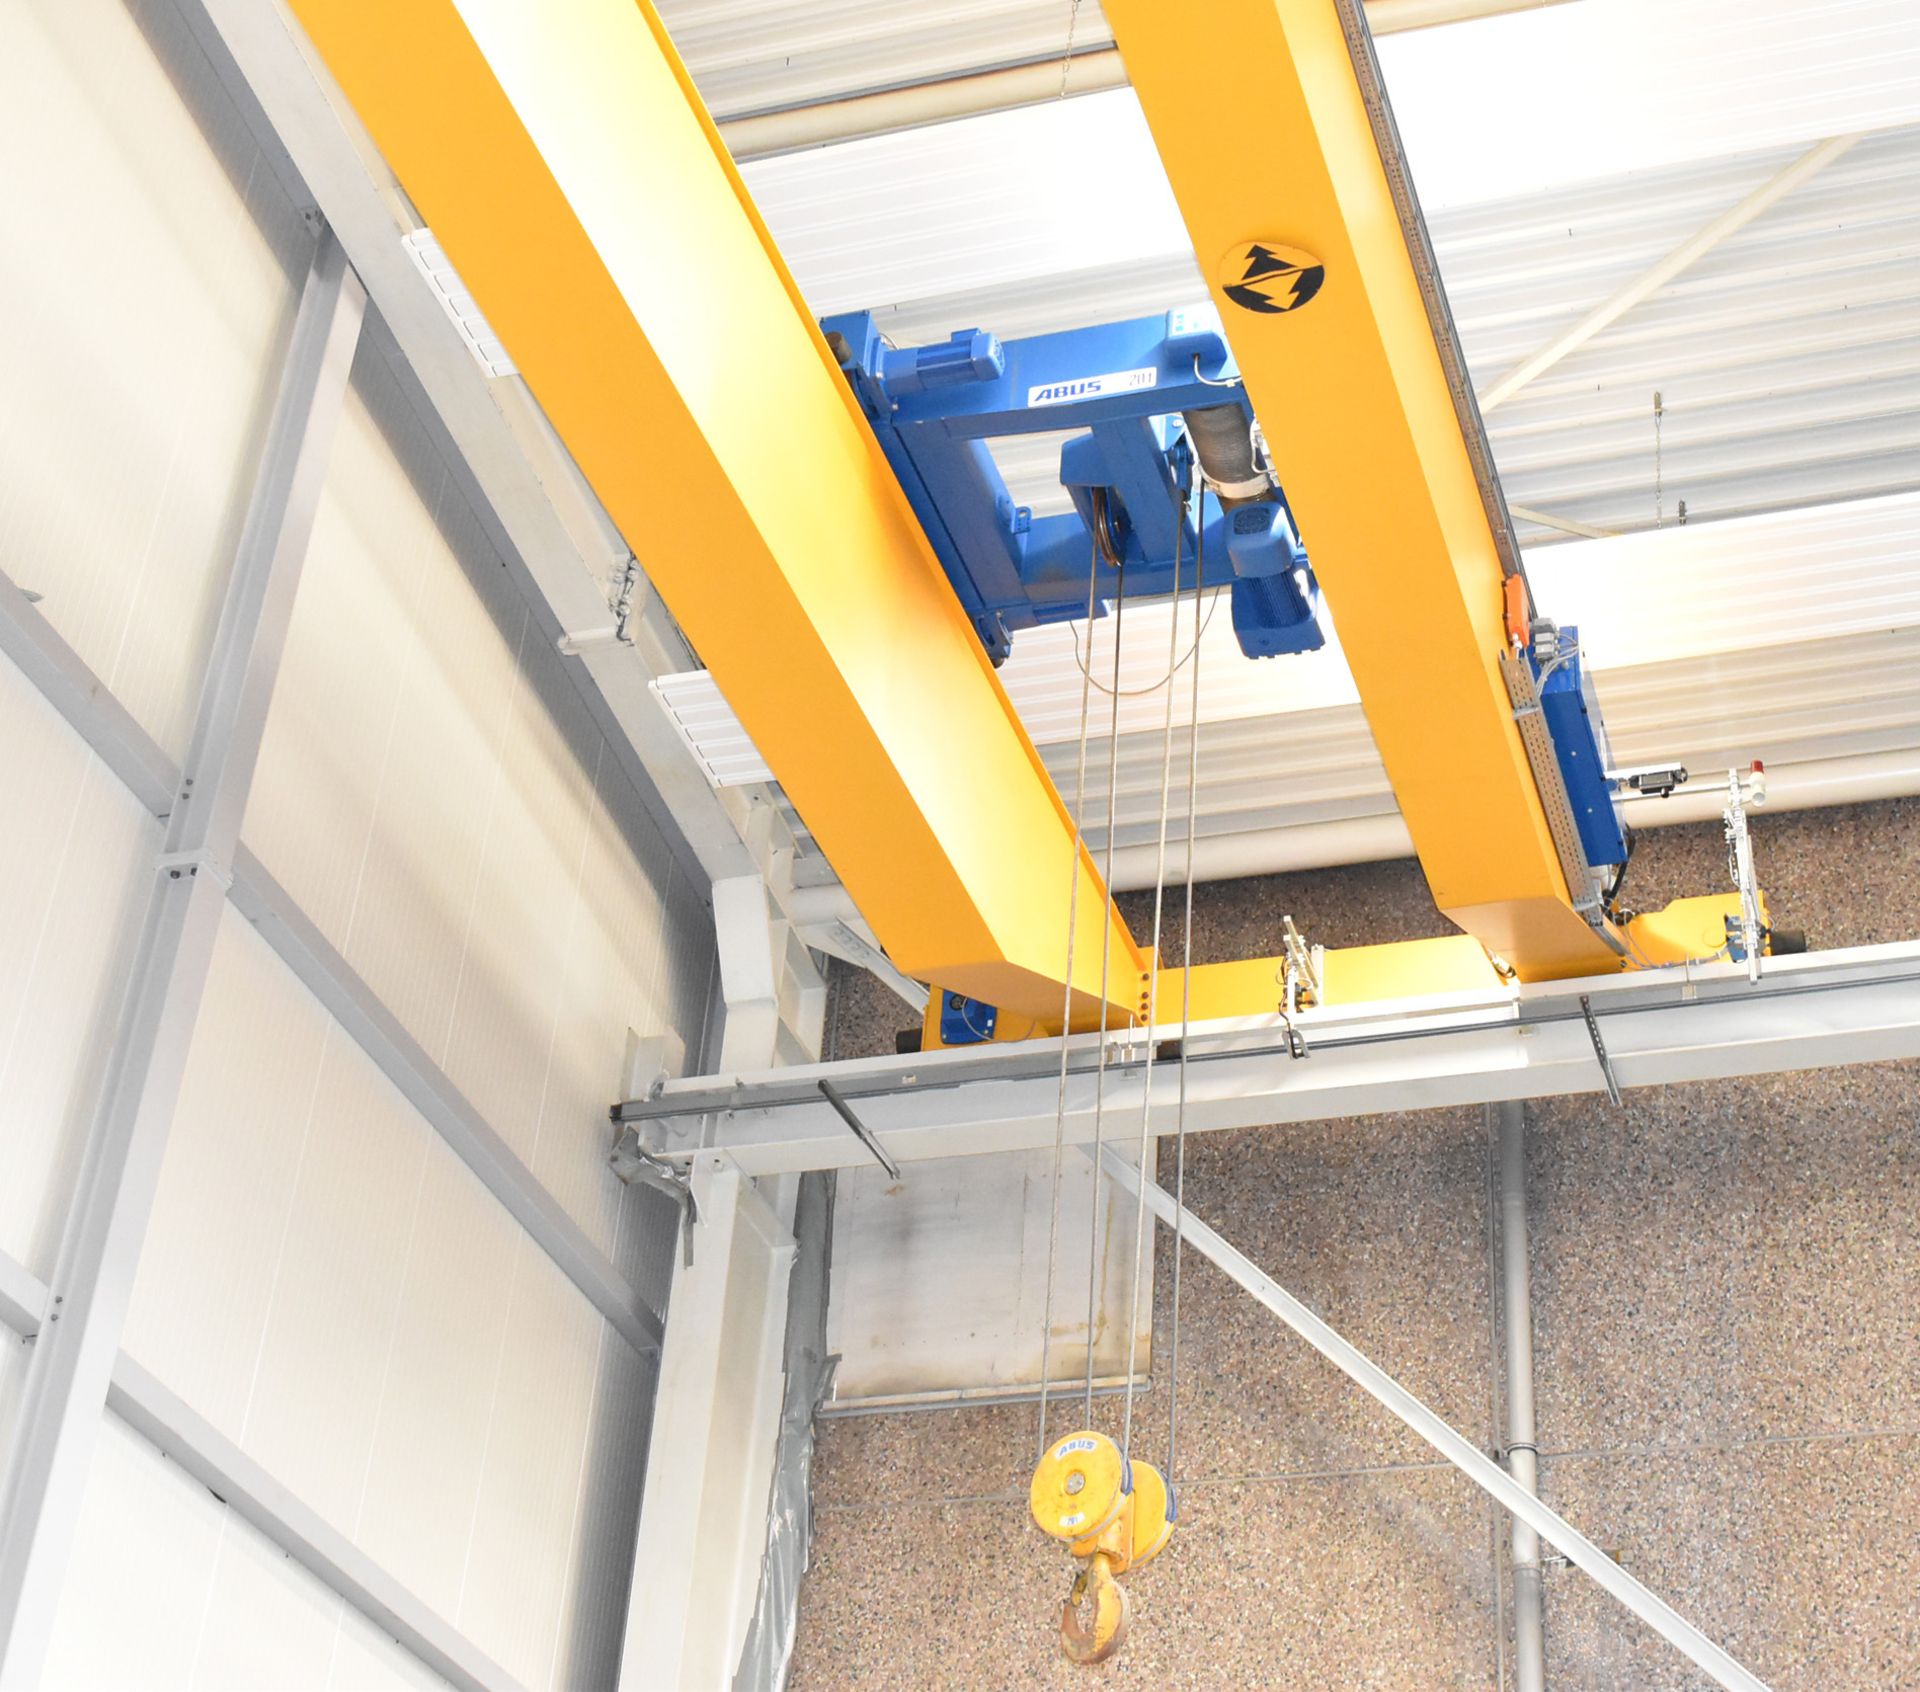 ABUS (2018) 20 TON CAPACITY DOUBLE GIRDER TOP RUNNING OVERHEAD CRANE WITH 24.75 M SPAN, 9.5 M HEIGHT - Image 5 of 7